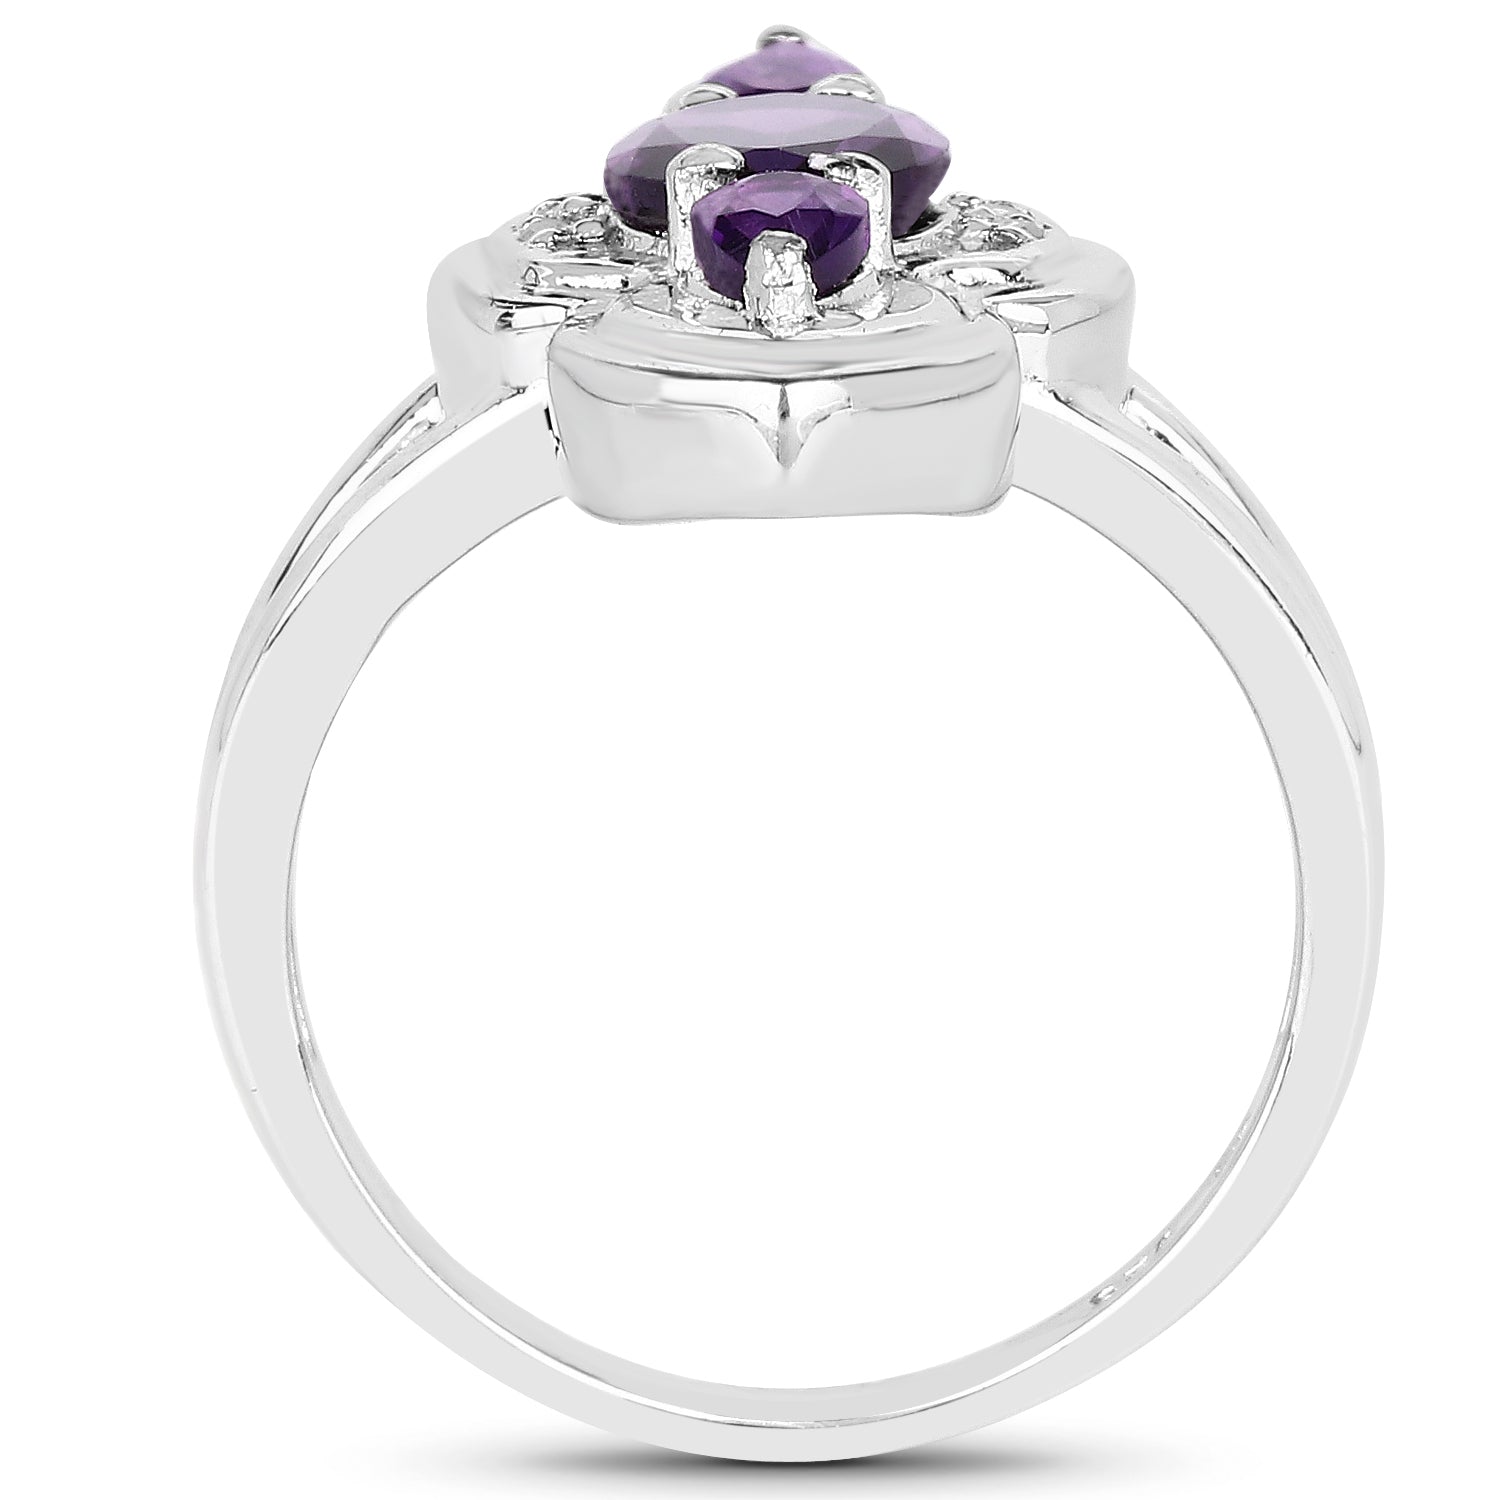 Genuine Amethyst and White Diamond Sterling Silver Ring - 1.58 ctw, February Birthstone, 3 Stone Design for Women, Gift for Sister, Mother or Her Bijou Her